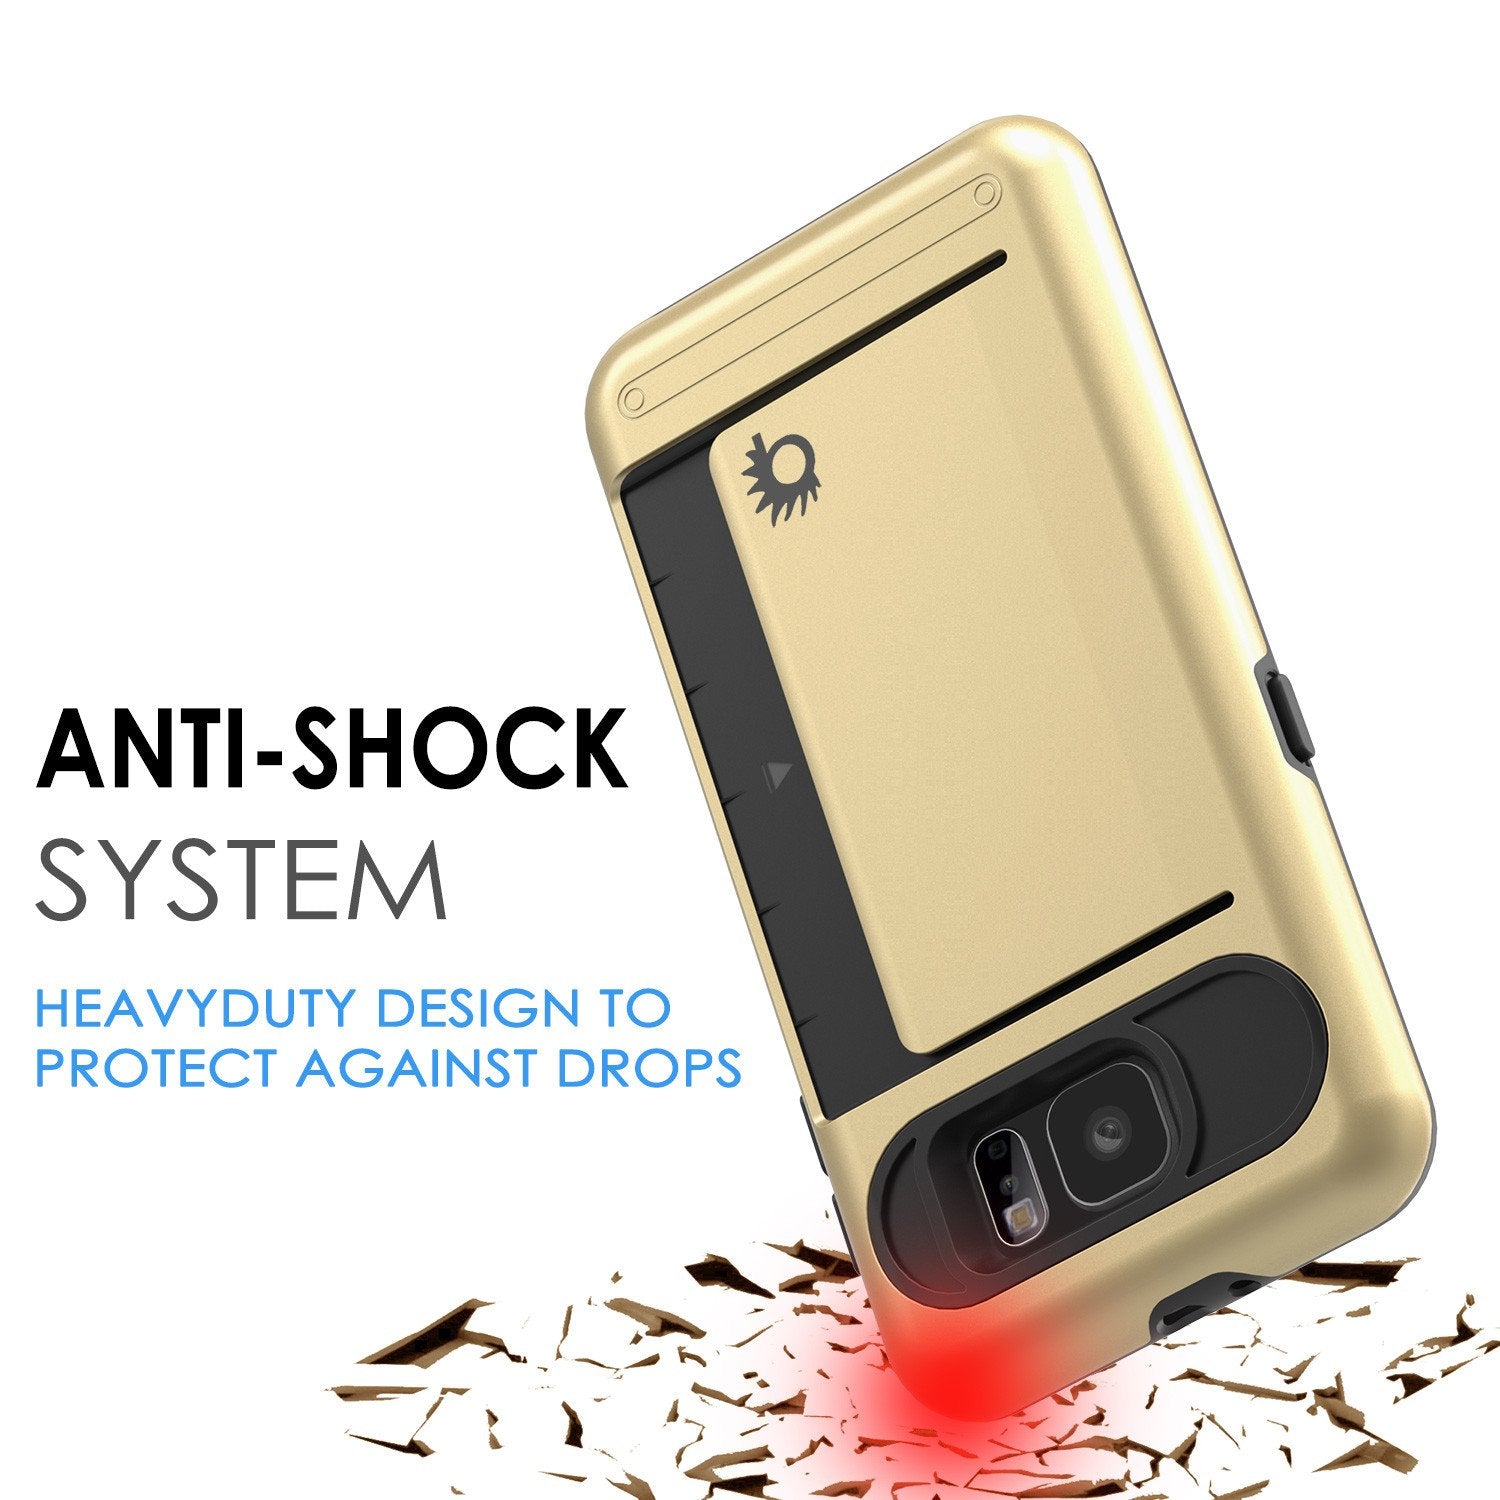 Galaxy s6 Case PunkCase CLUTCH Gold Series Slim Armor Soft Cover Case w/ Tempered Glass - PunkCase NZ